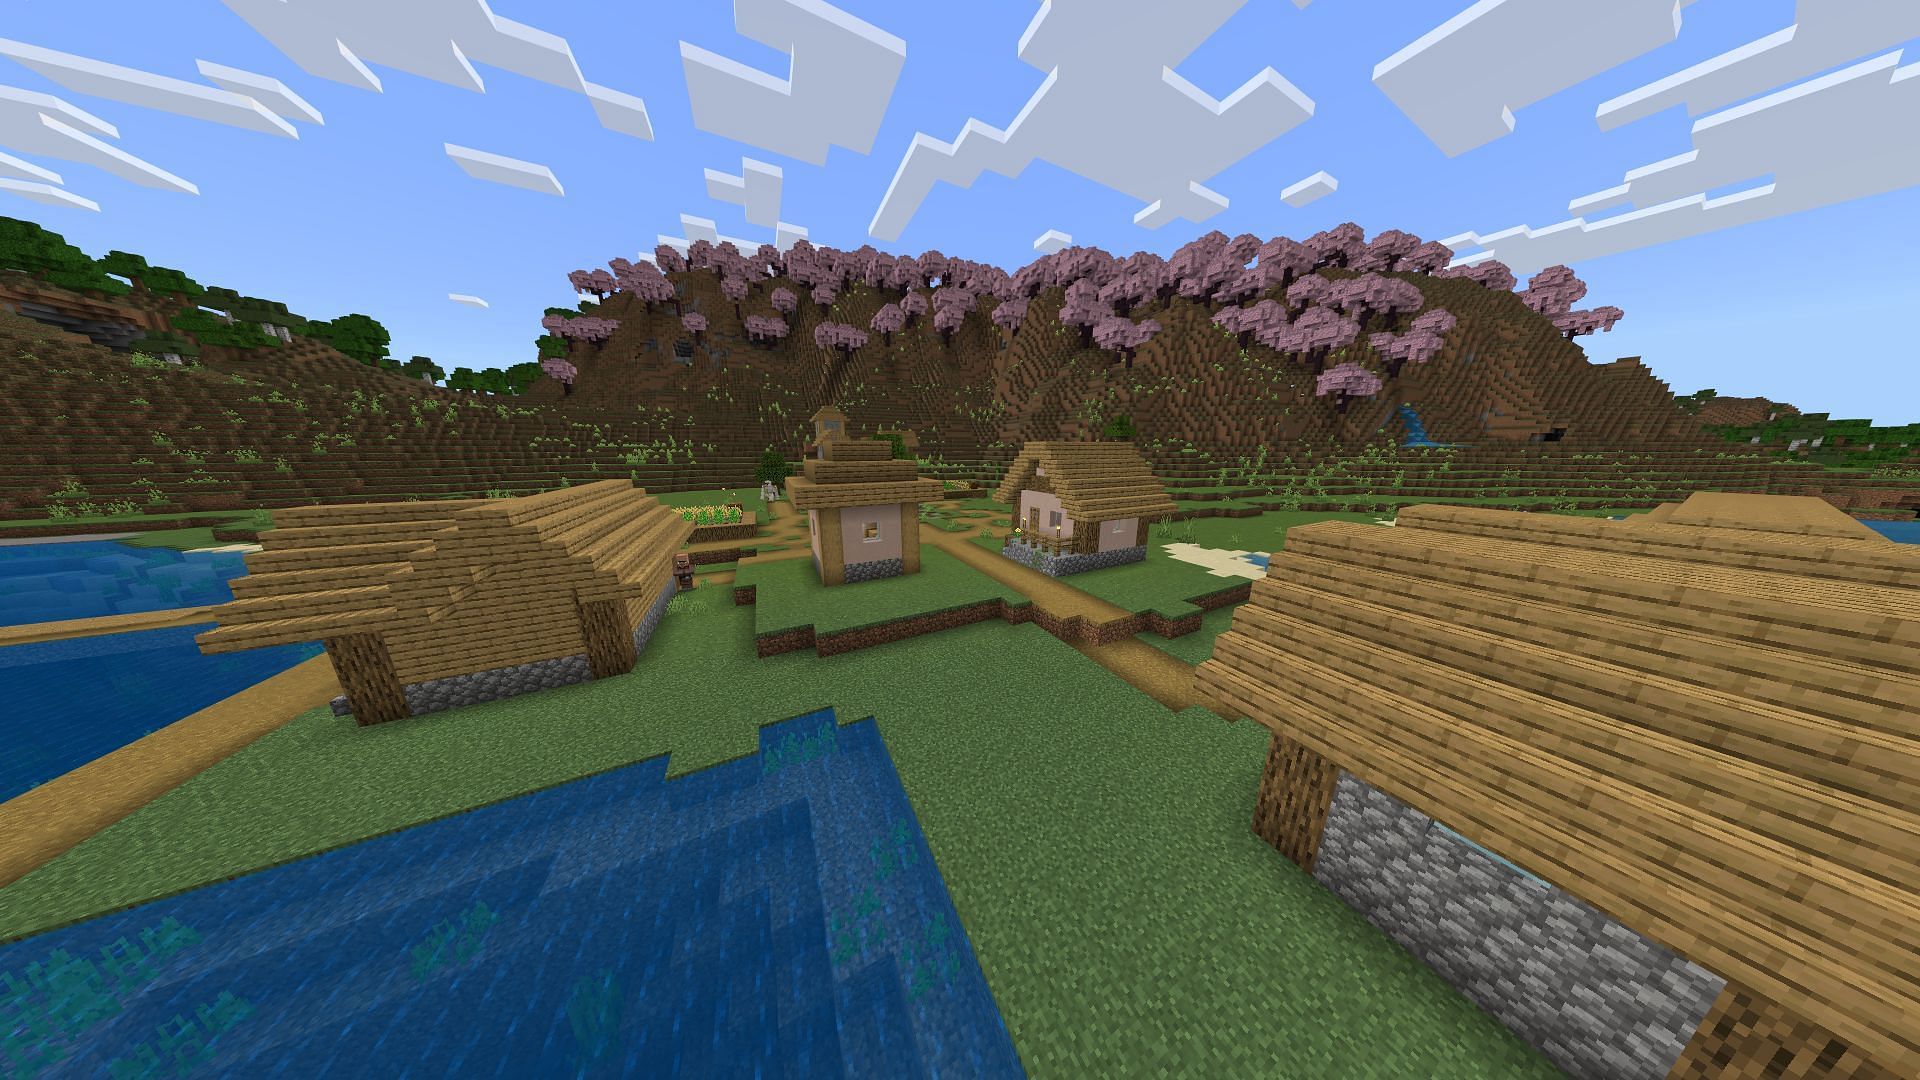 Cherry groves are just a short walk away in this Minecraft seed (Image via Mojang)